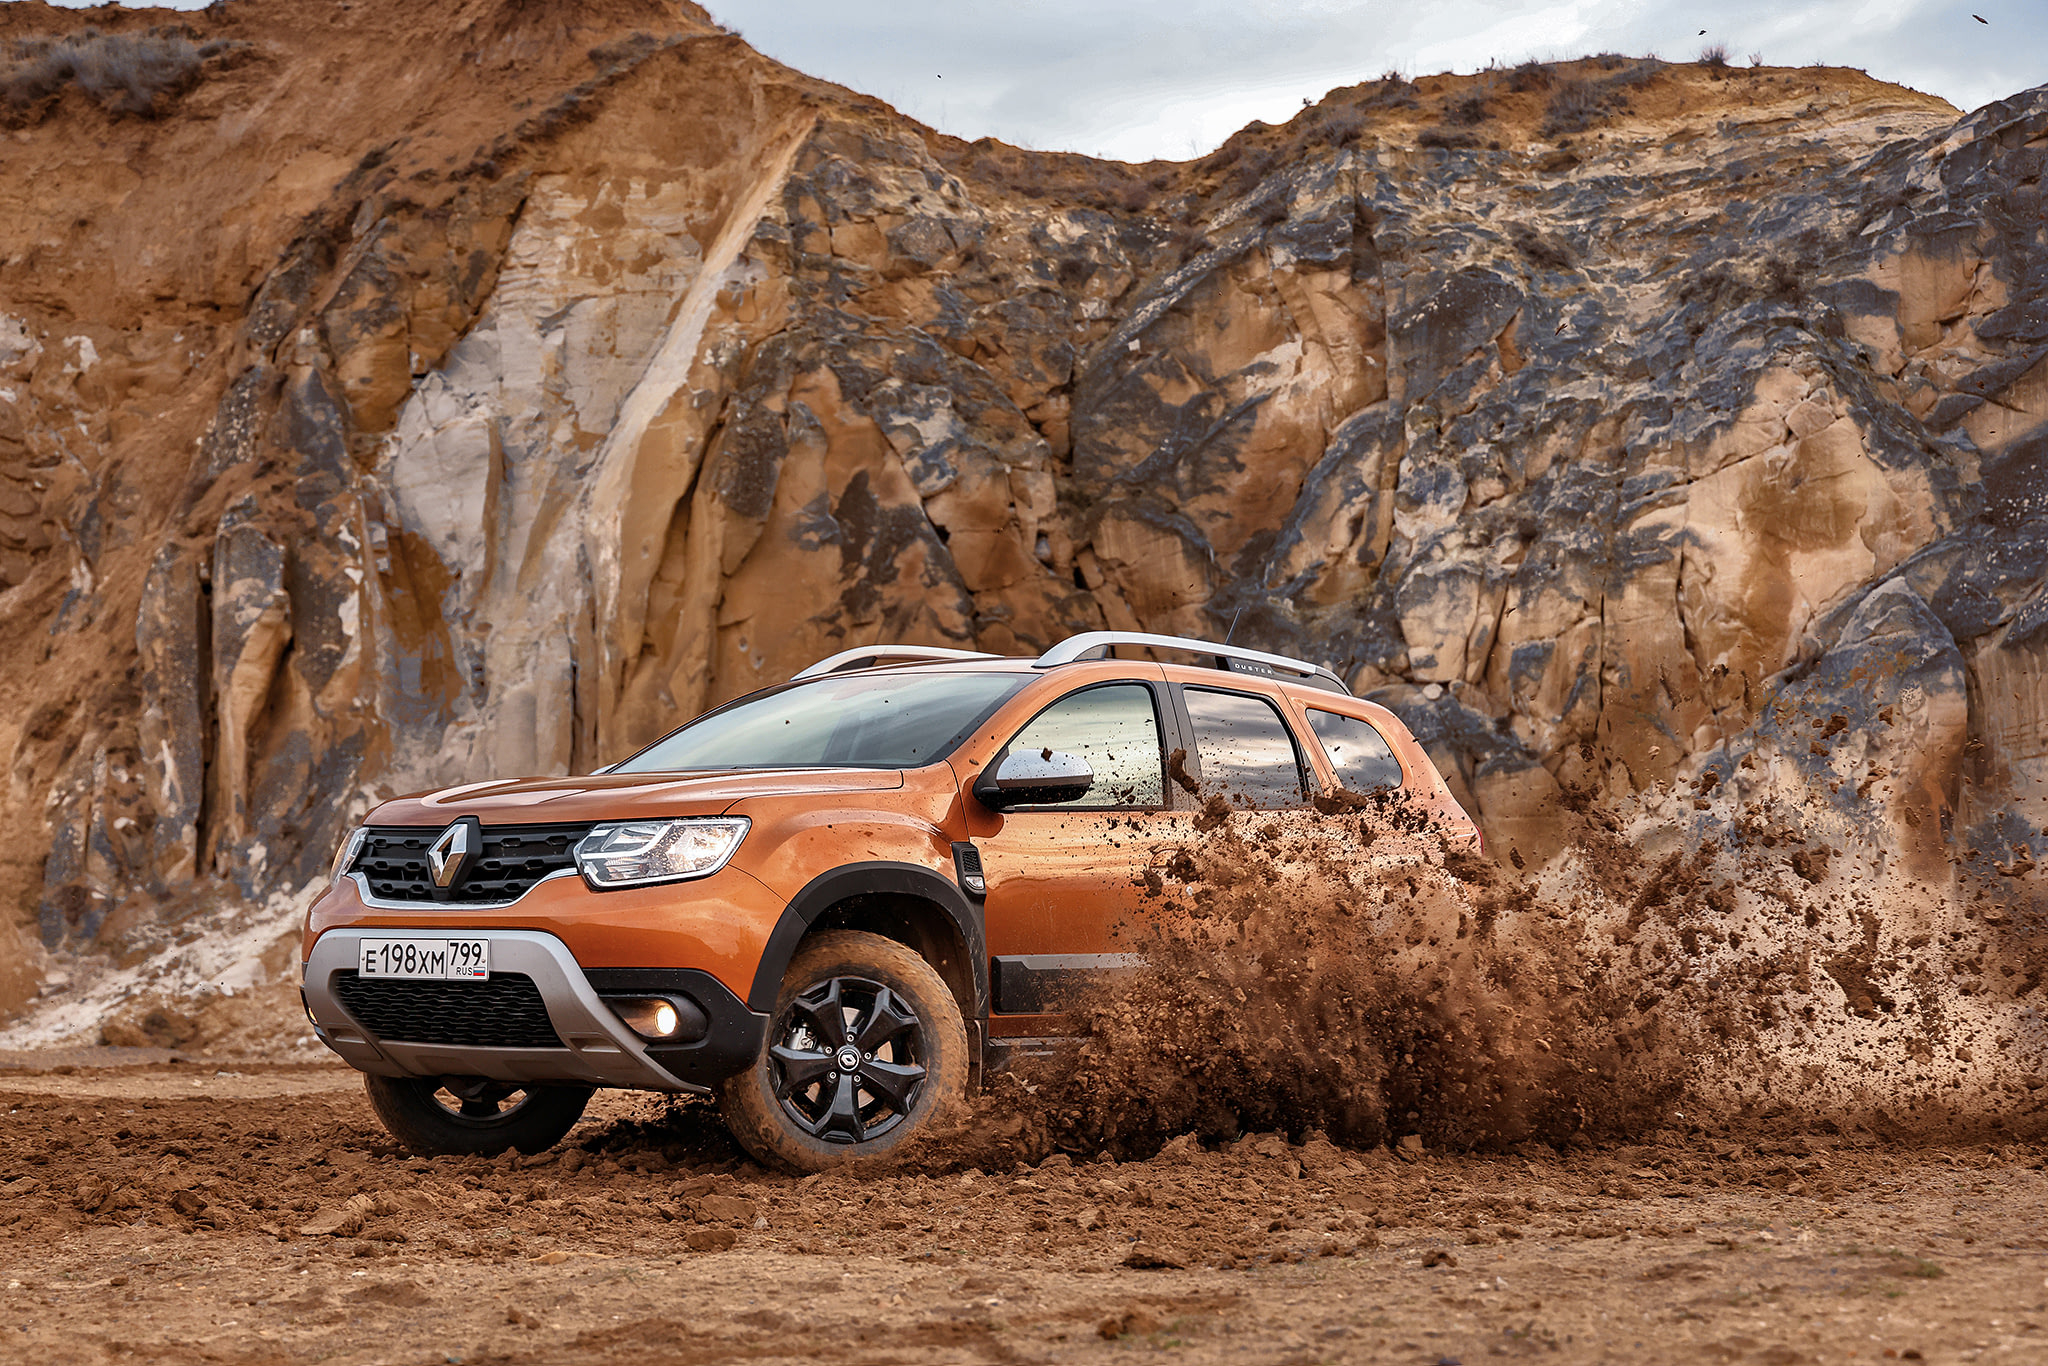 Рено дастер 2021 2.0. Renault Duster 2021. Новый Рено Дастер 2021. Renault Duster New. Reno Duster 2022.